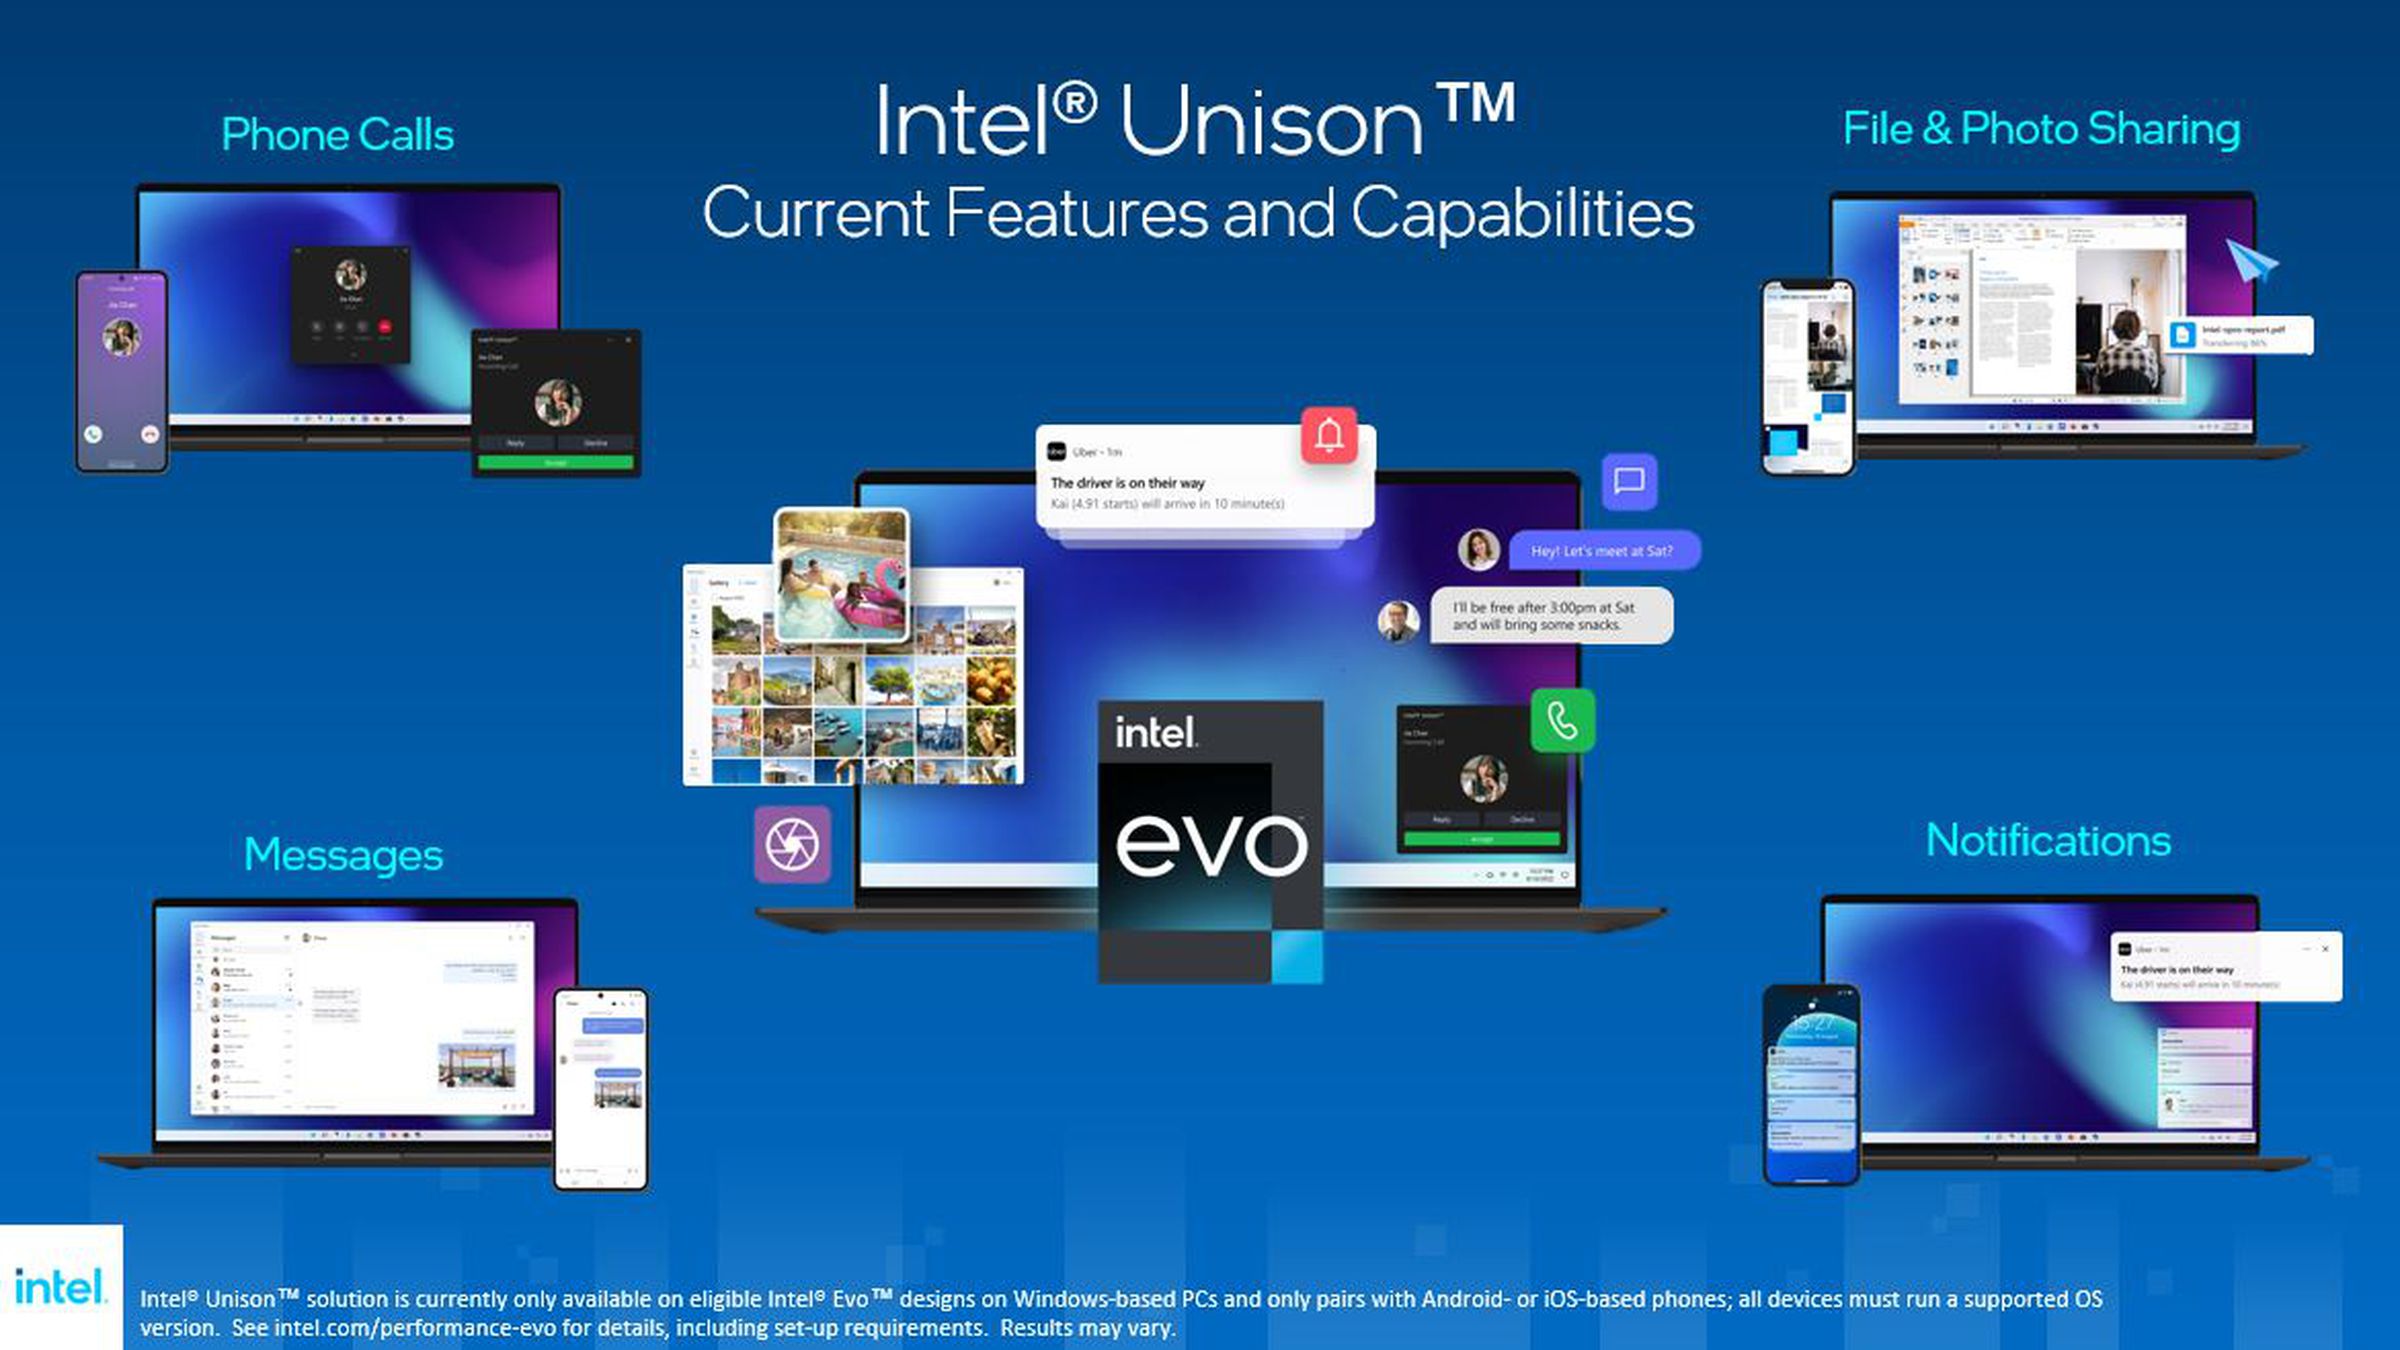 A grid of Intel Unison Current Features and Capabilities, including Phone Calls, File Sharing, Messages, and Notifications with photographs of laptops and phones displaying each.